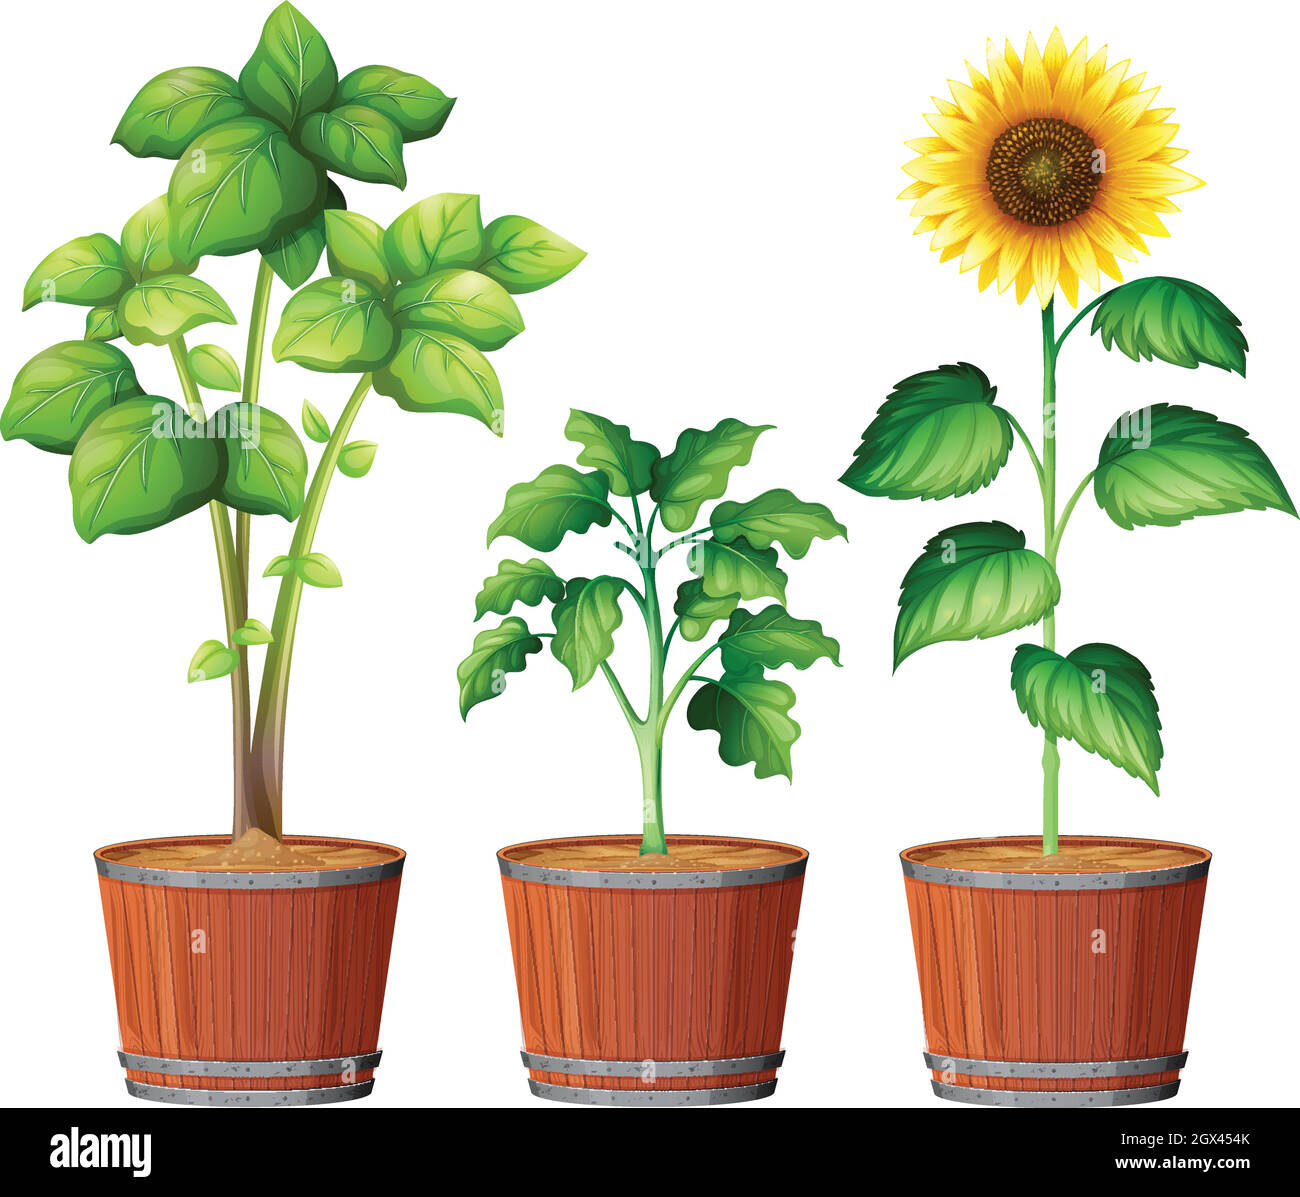 Sunflower Planting in the Pot Stock Vector